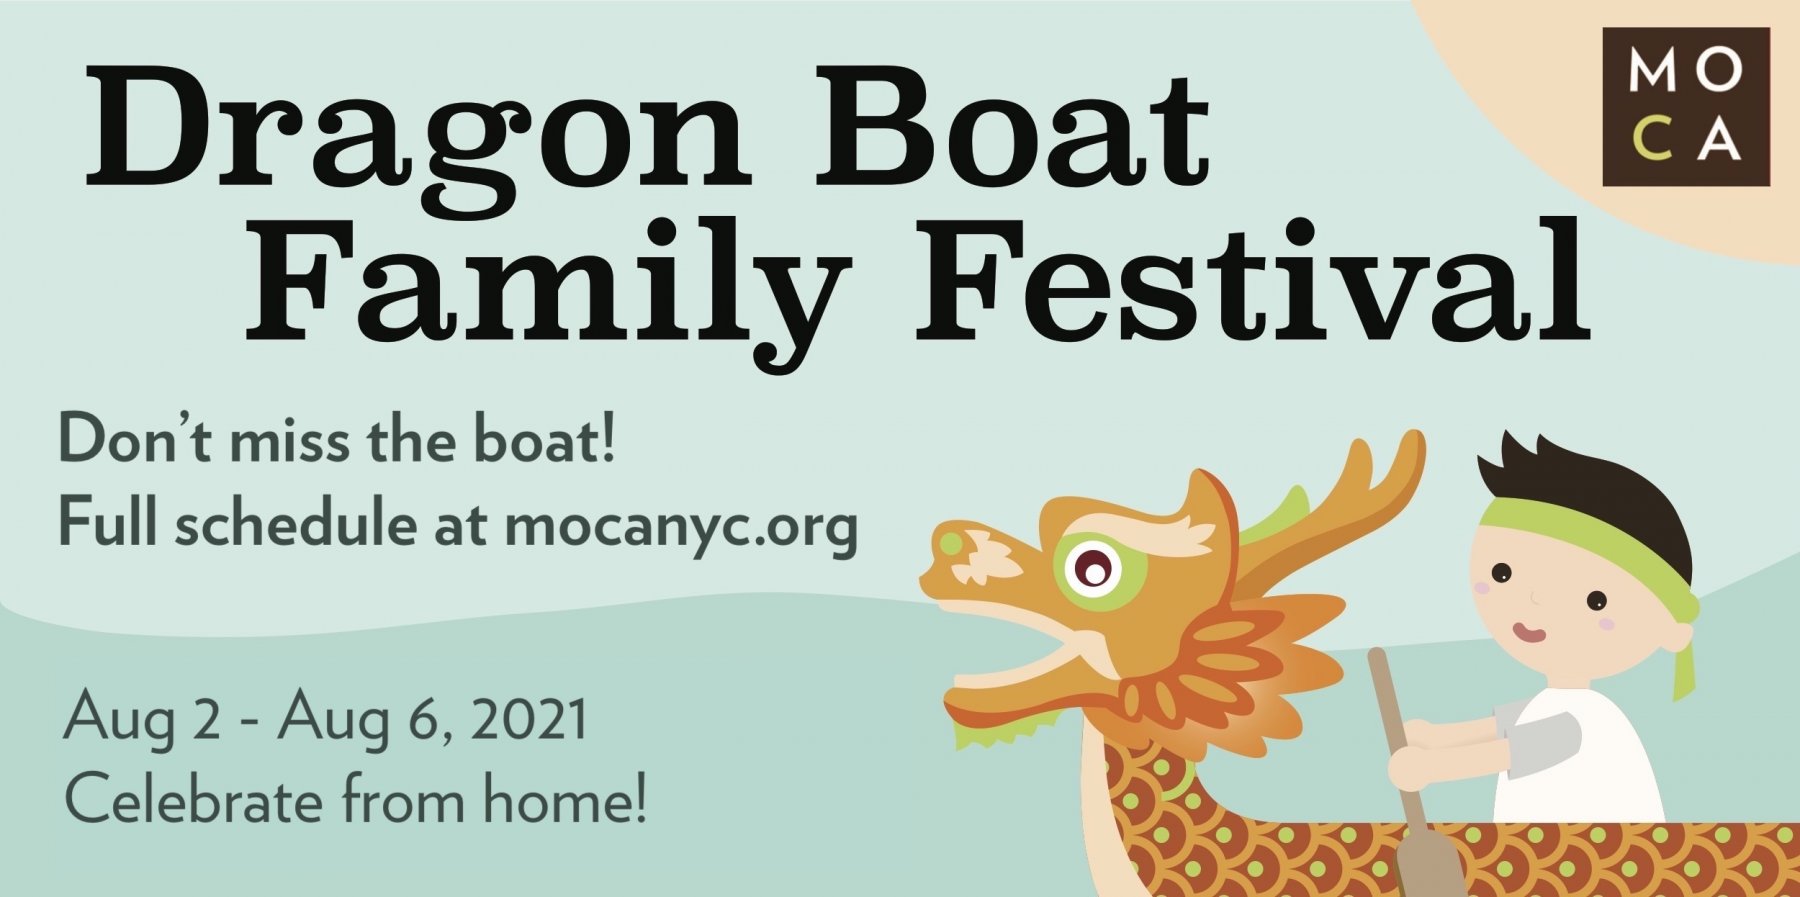 Poster featuring a cute cartoon of a dragon boat and dragon boat racer.